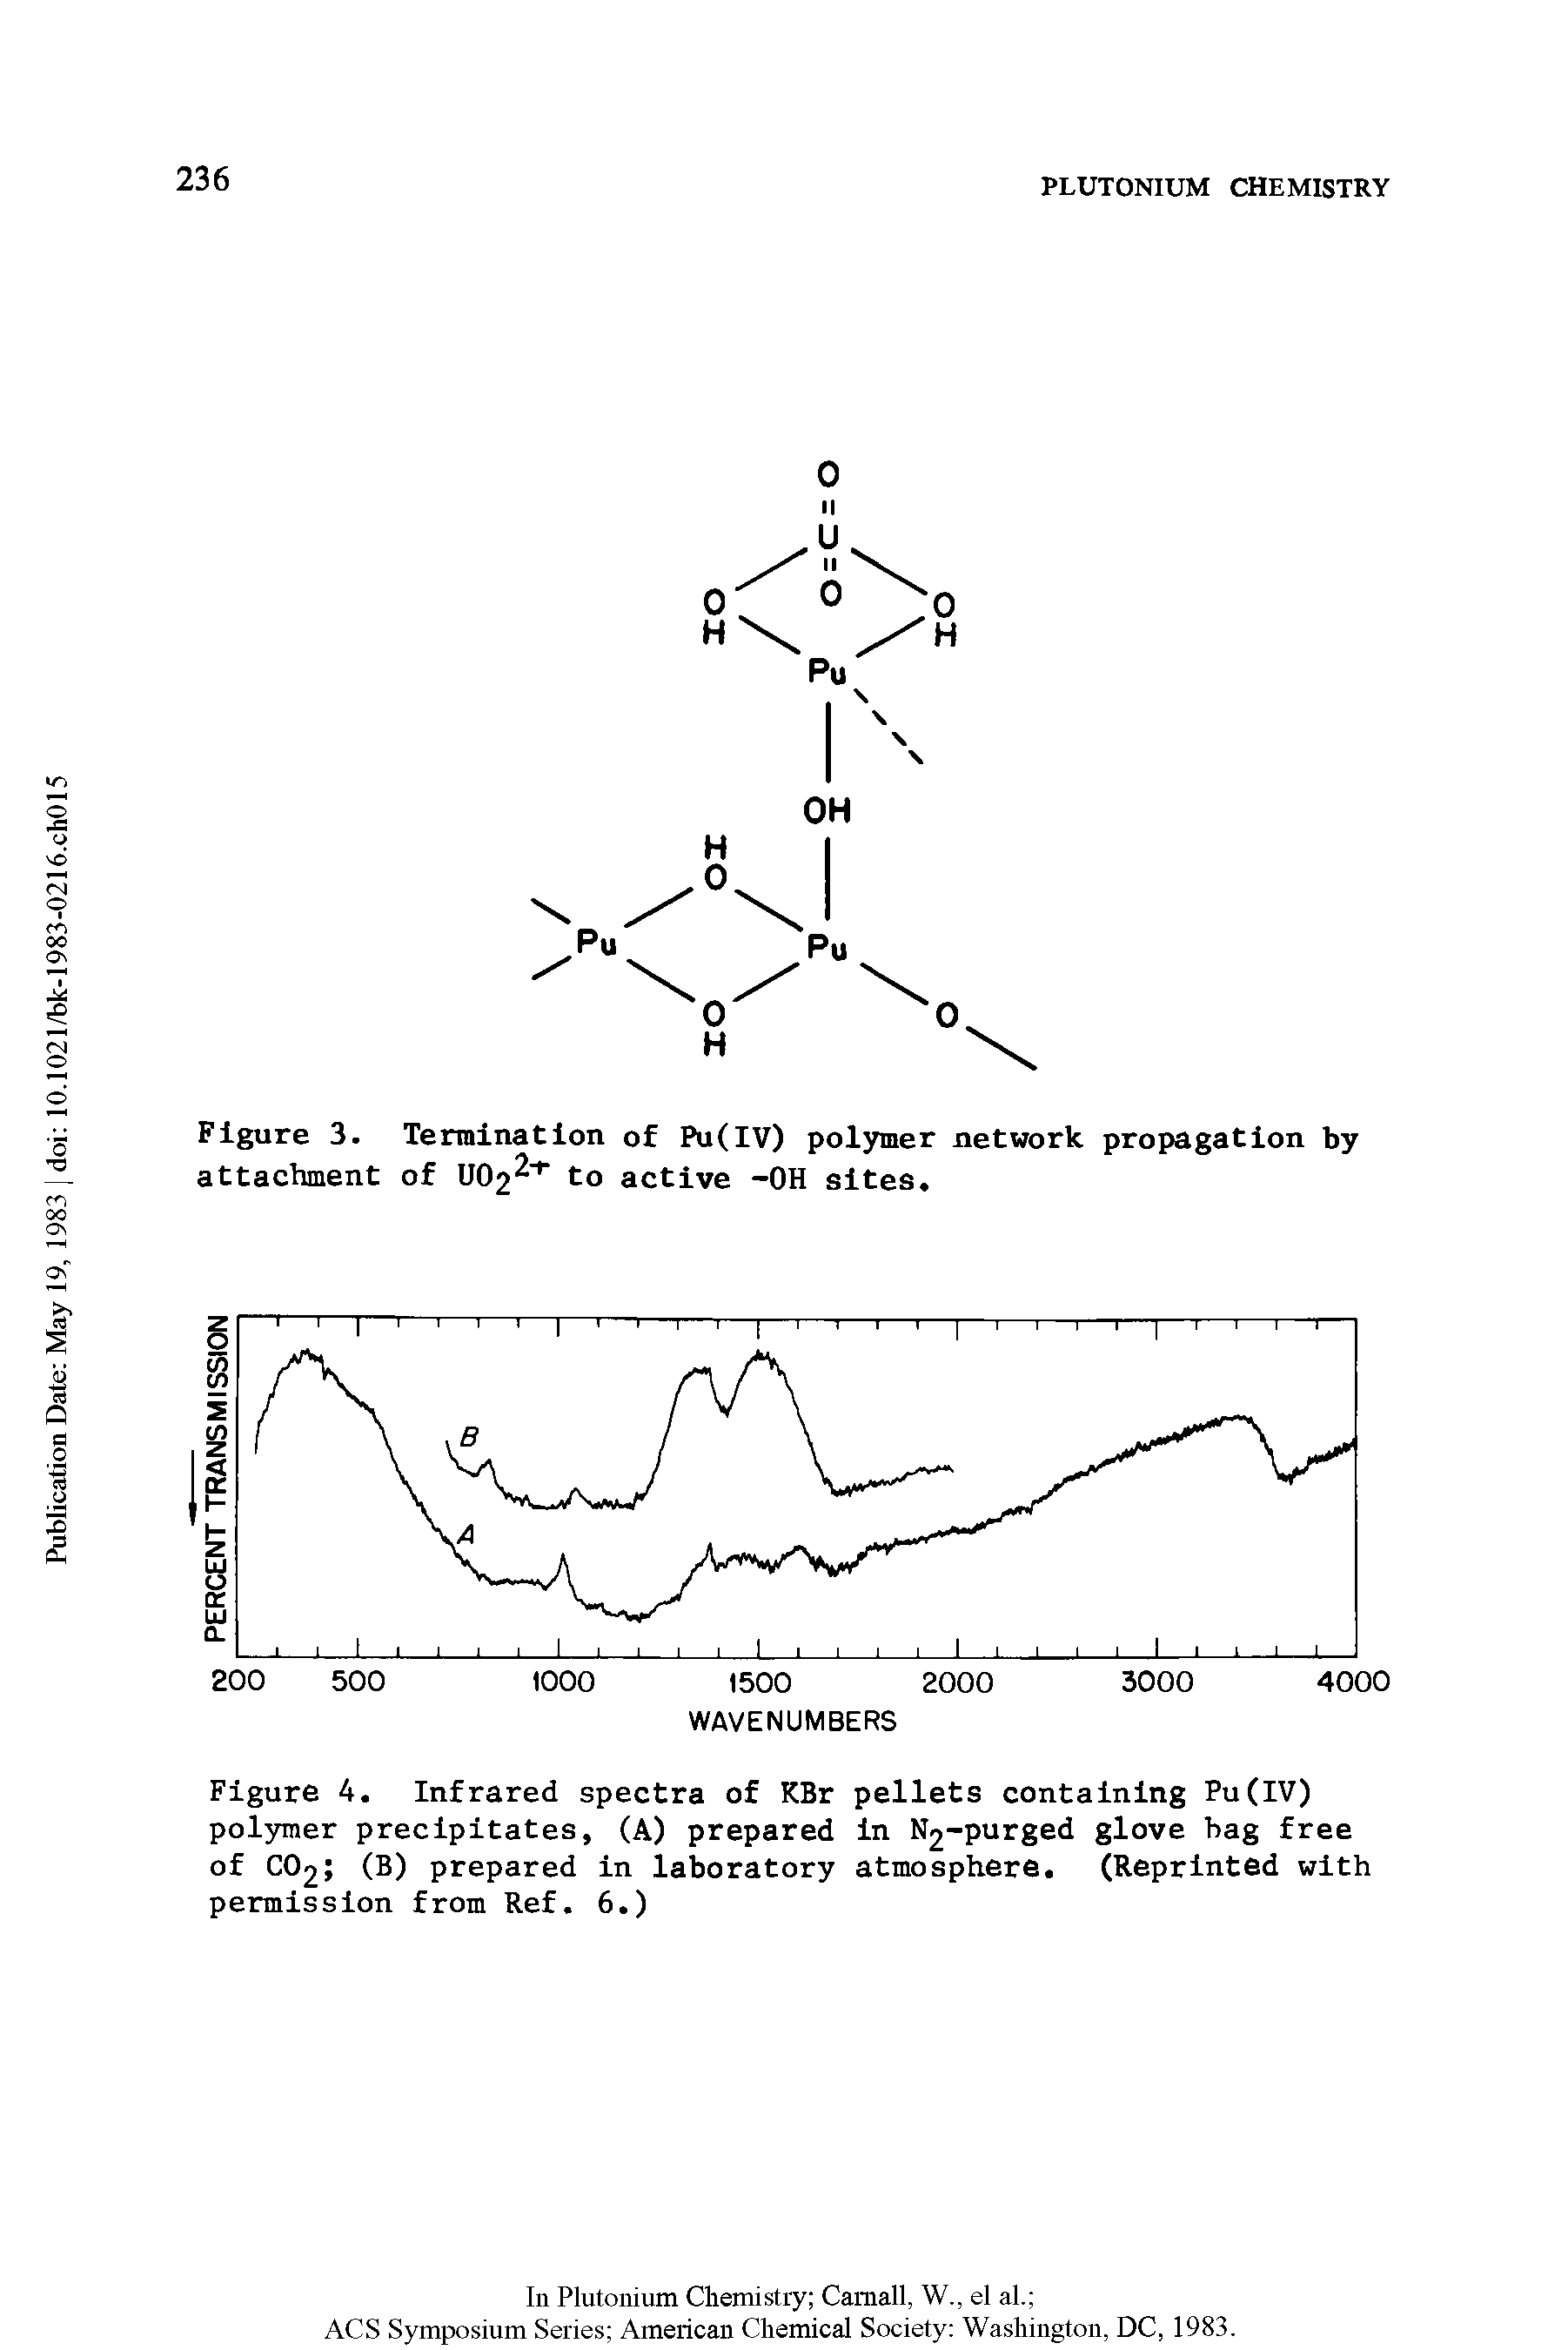 Figure 3. Termination of Pu(IV) polymer network propagation by attachment of V02 r to active -OH sites.